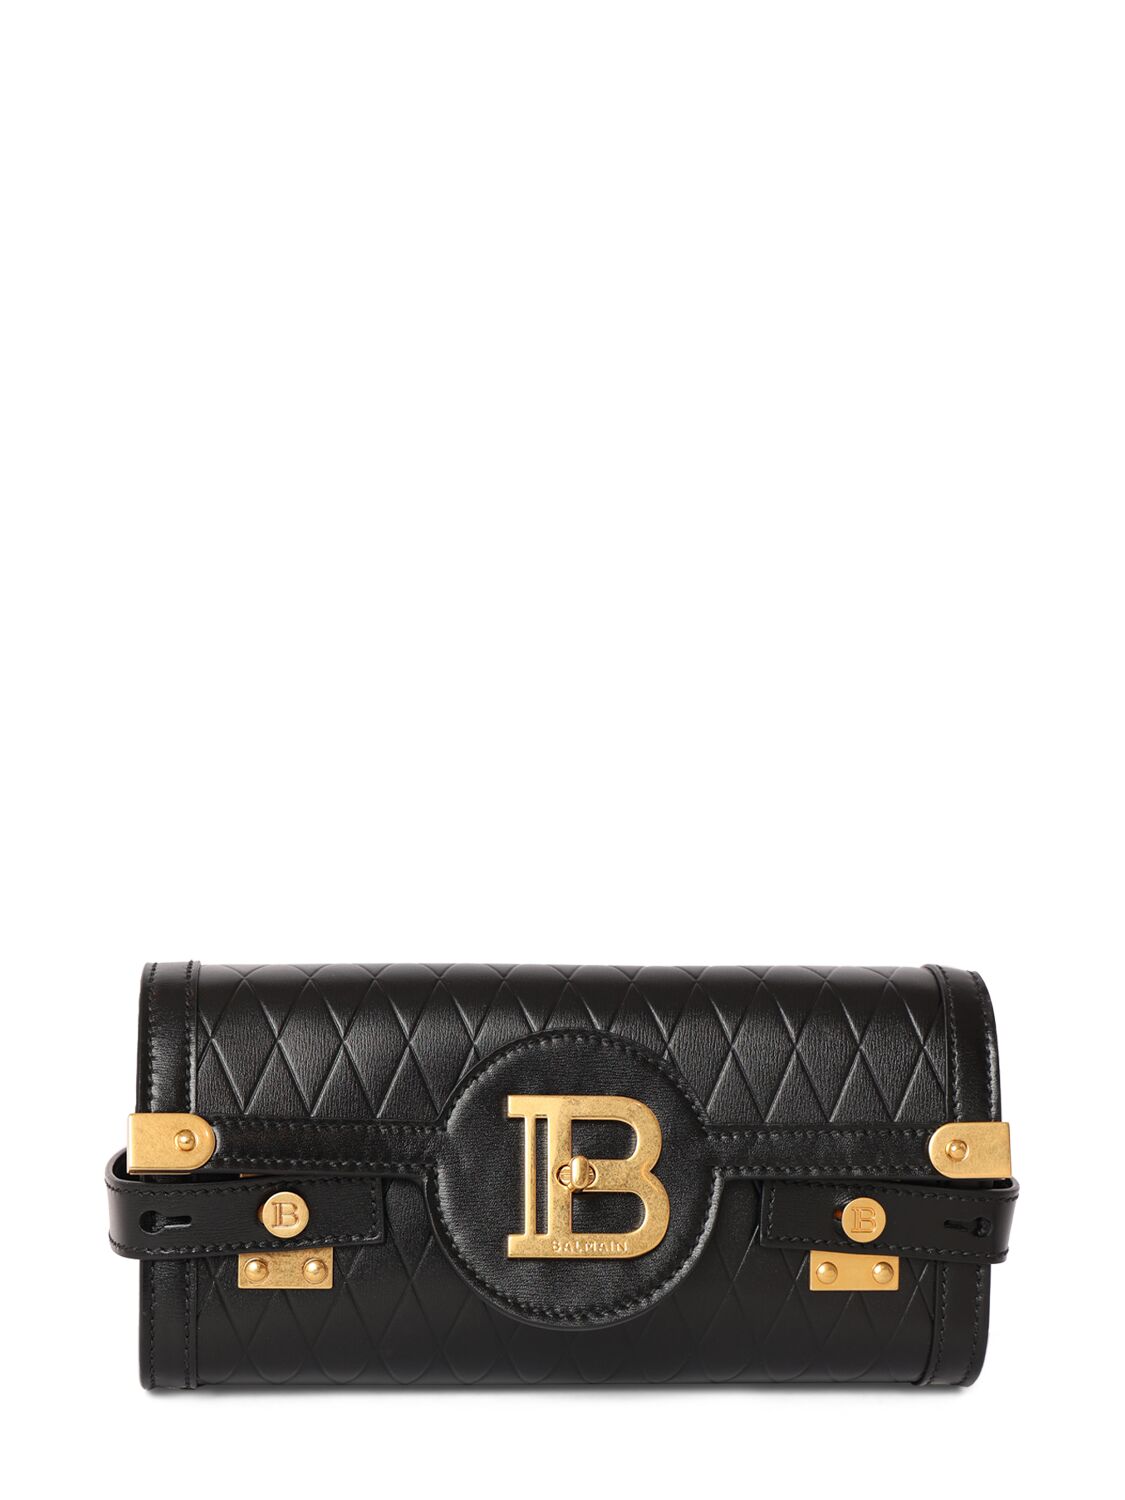 Image of B-buzz 23 Embossed Leather Clutch